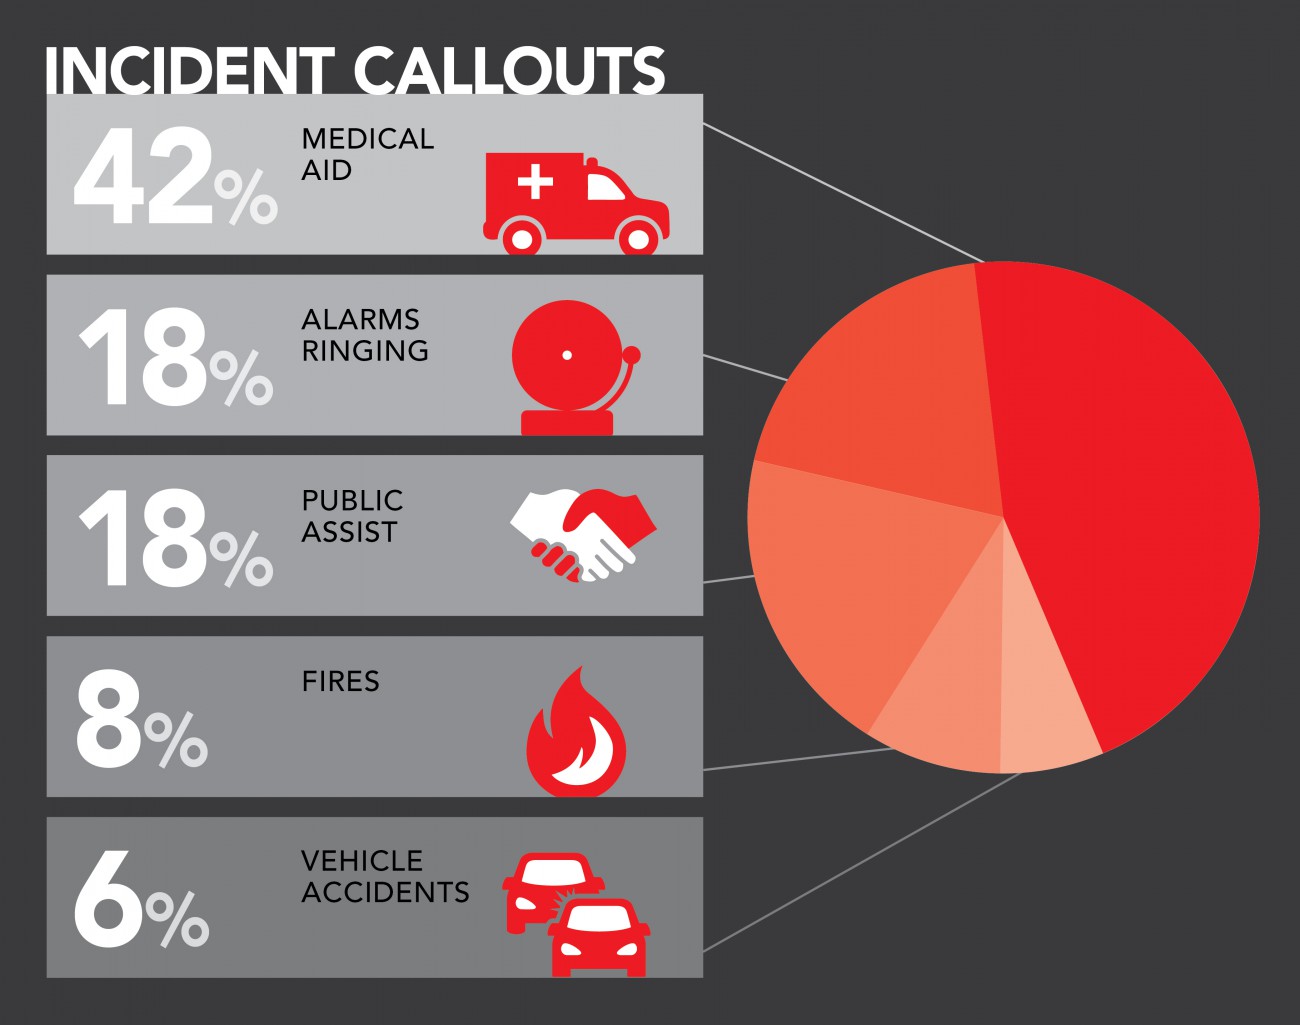 Infographic: Incident types: 42% medical aid, 18% fire alarm, 18% public assist, 8% fires, 6% vehicle accidents, 5% investigations, 3% rescue